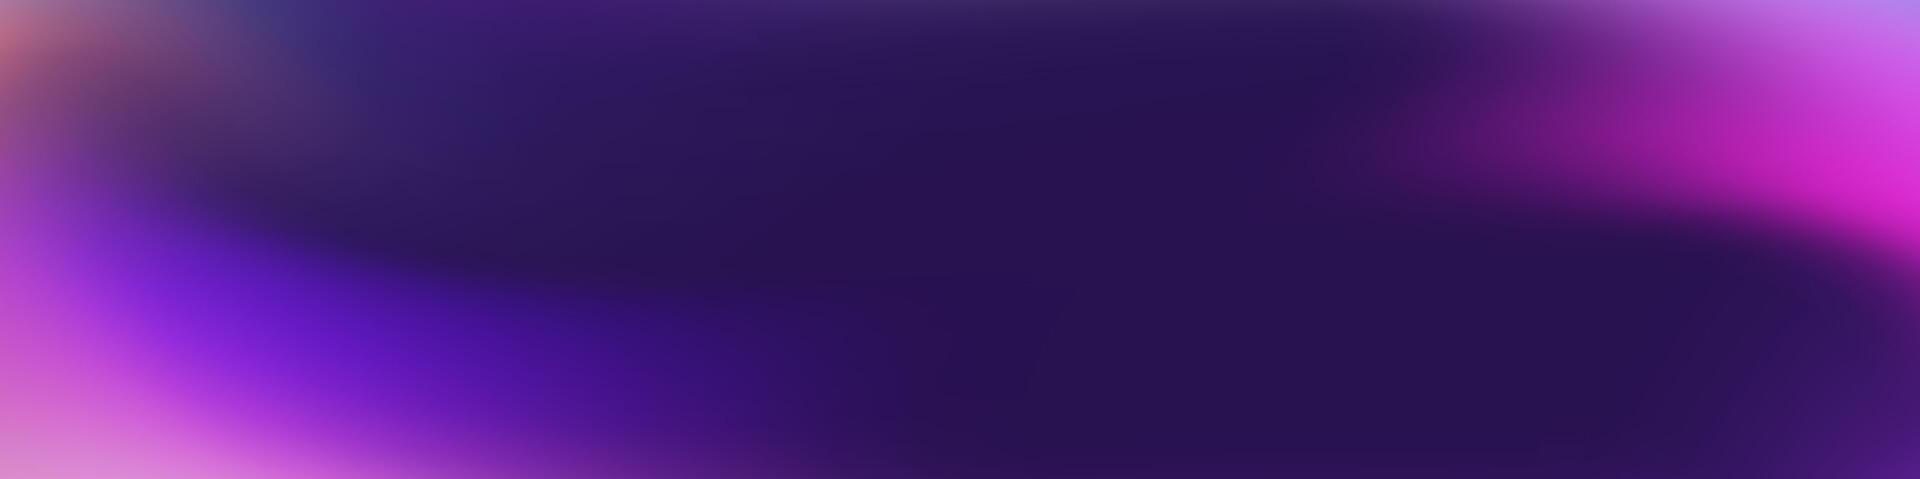 Abstract Background violet blue color with Blurred Image is a  visually appealing design asset for use in advertisements, websites, or social media posts to add a modern touch to the visuals. vector